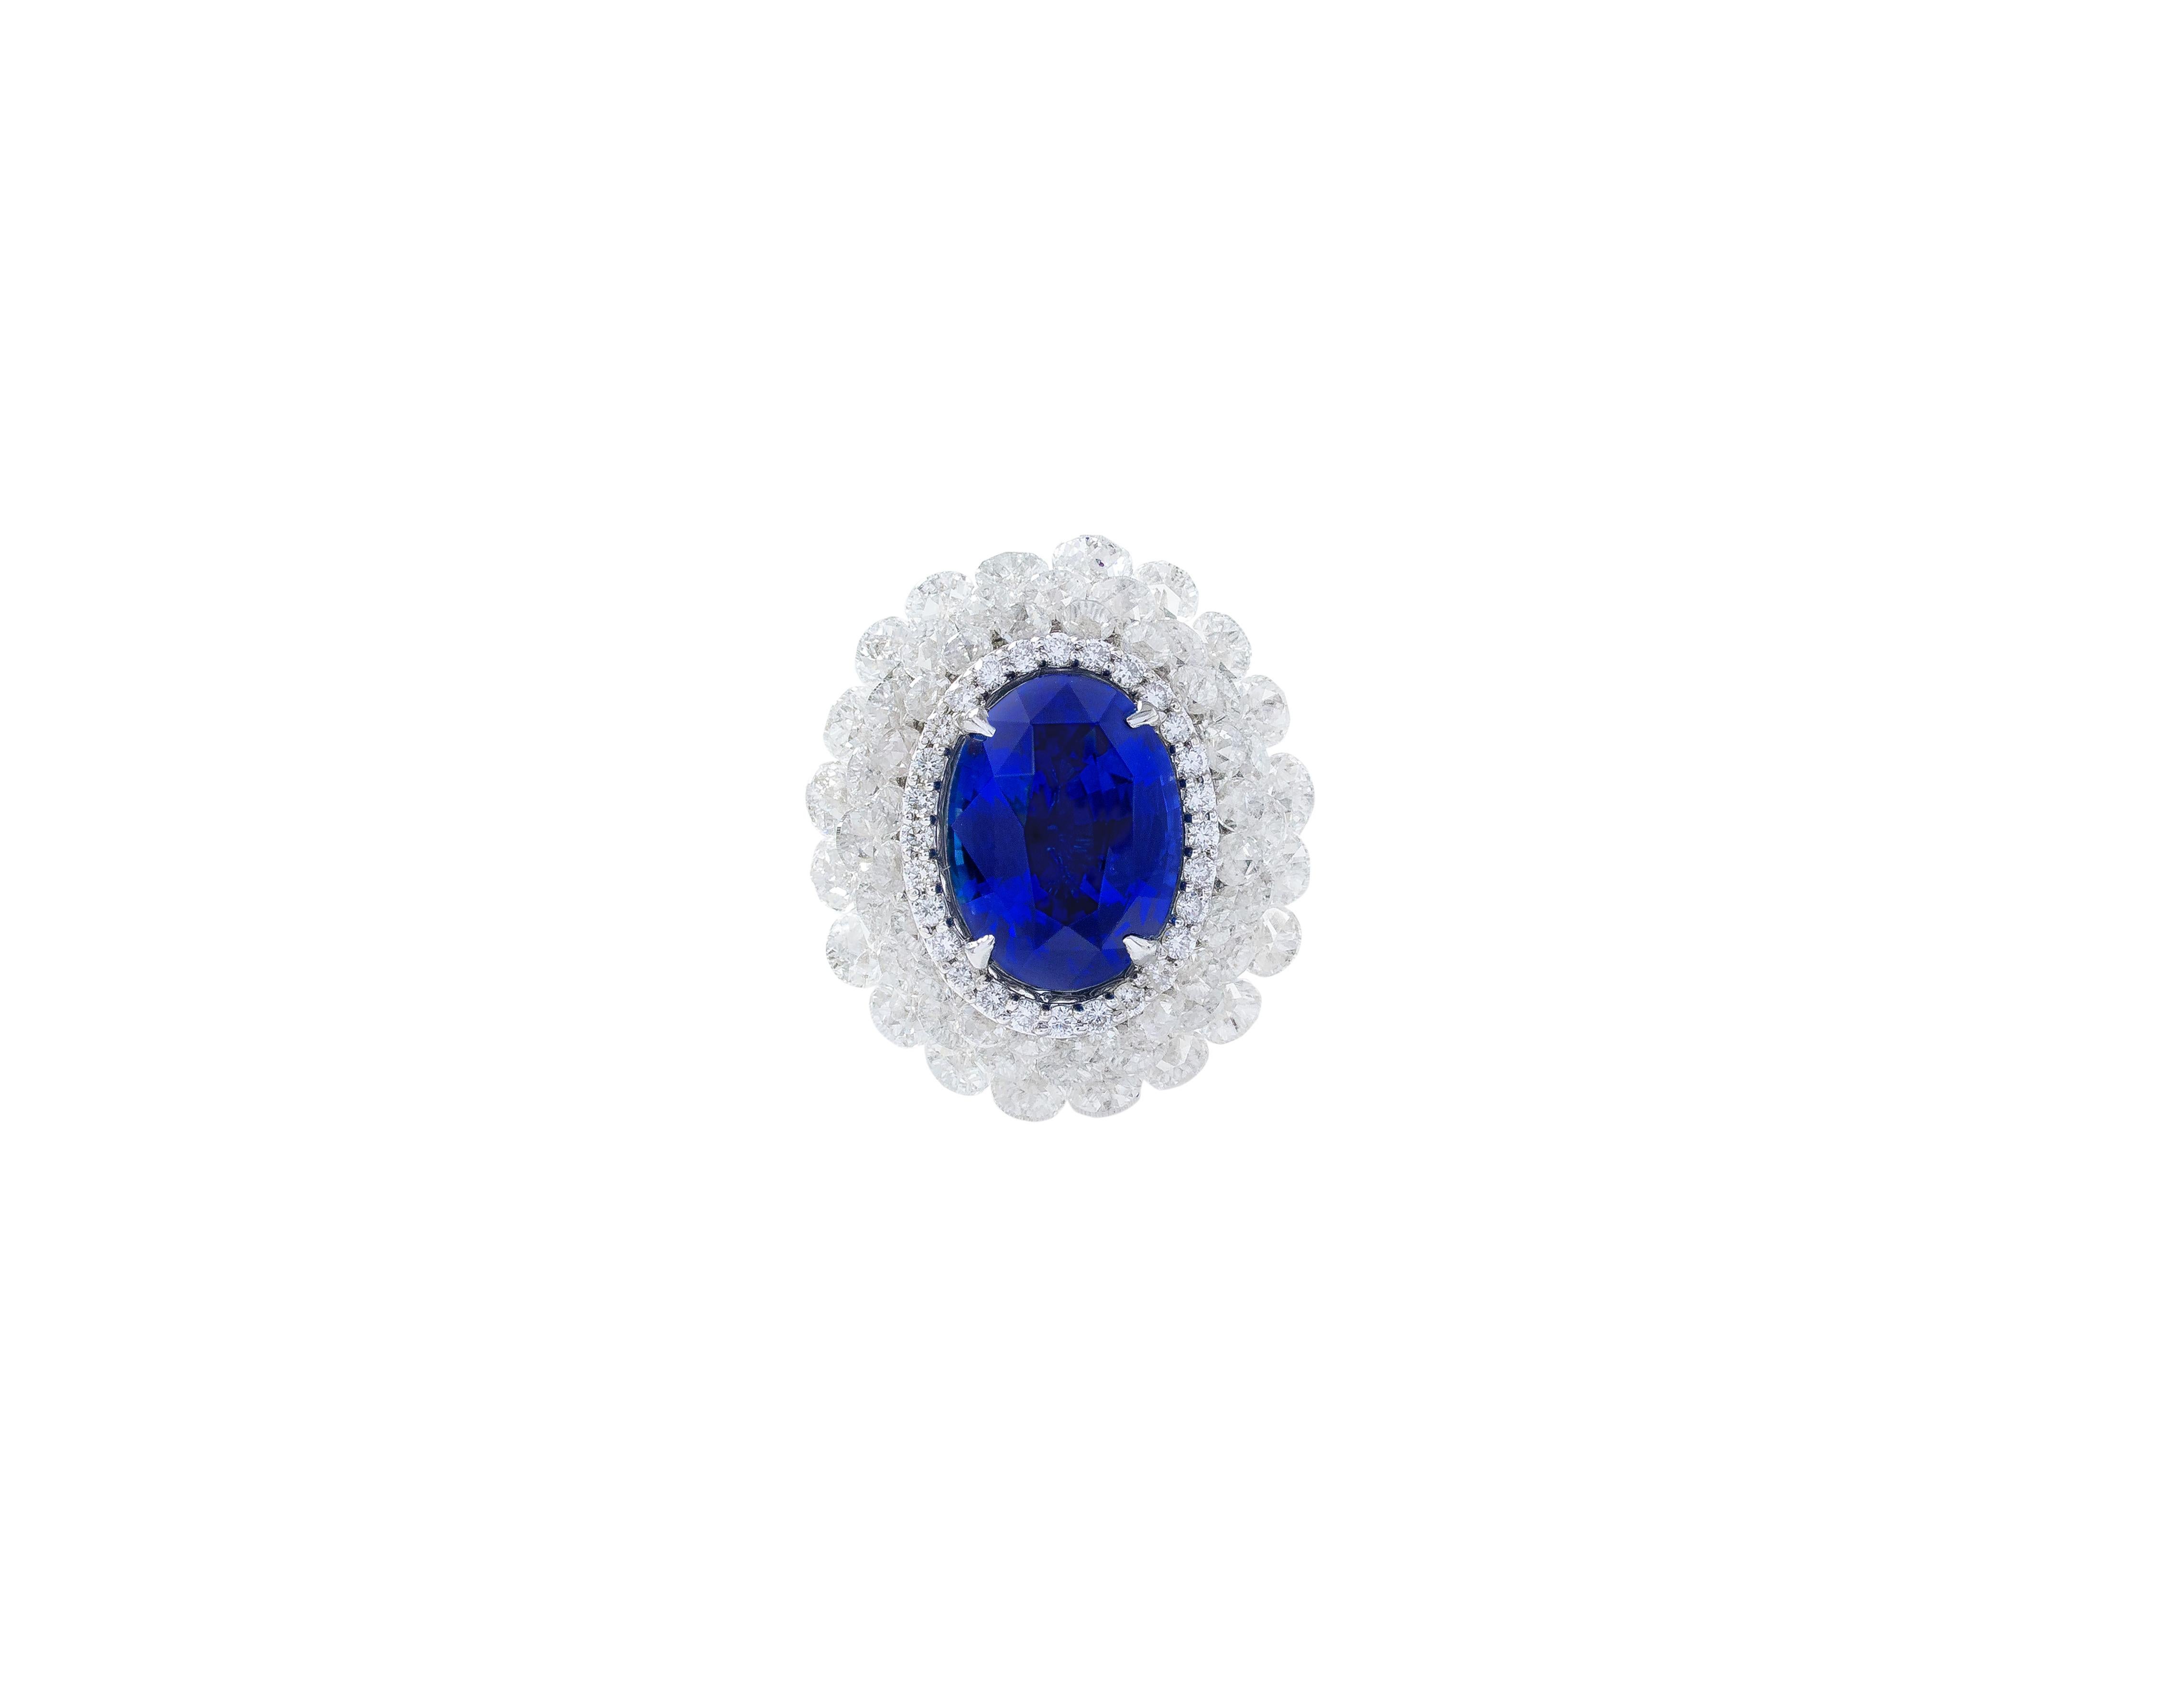 Women's 18 Karat White Gold 3.80 Carat Sapphire and Diamond Cocktail Ring For Sale